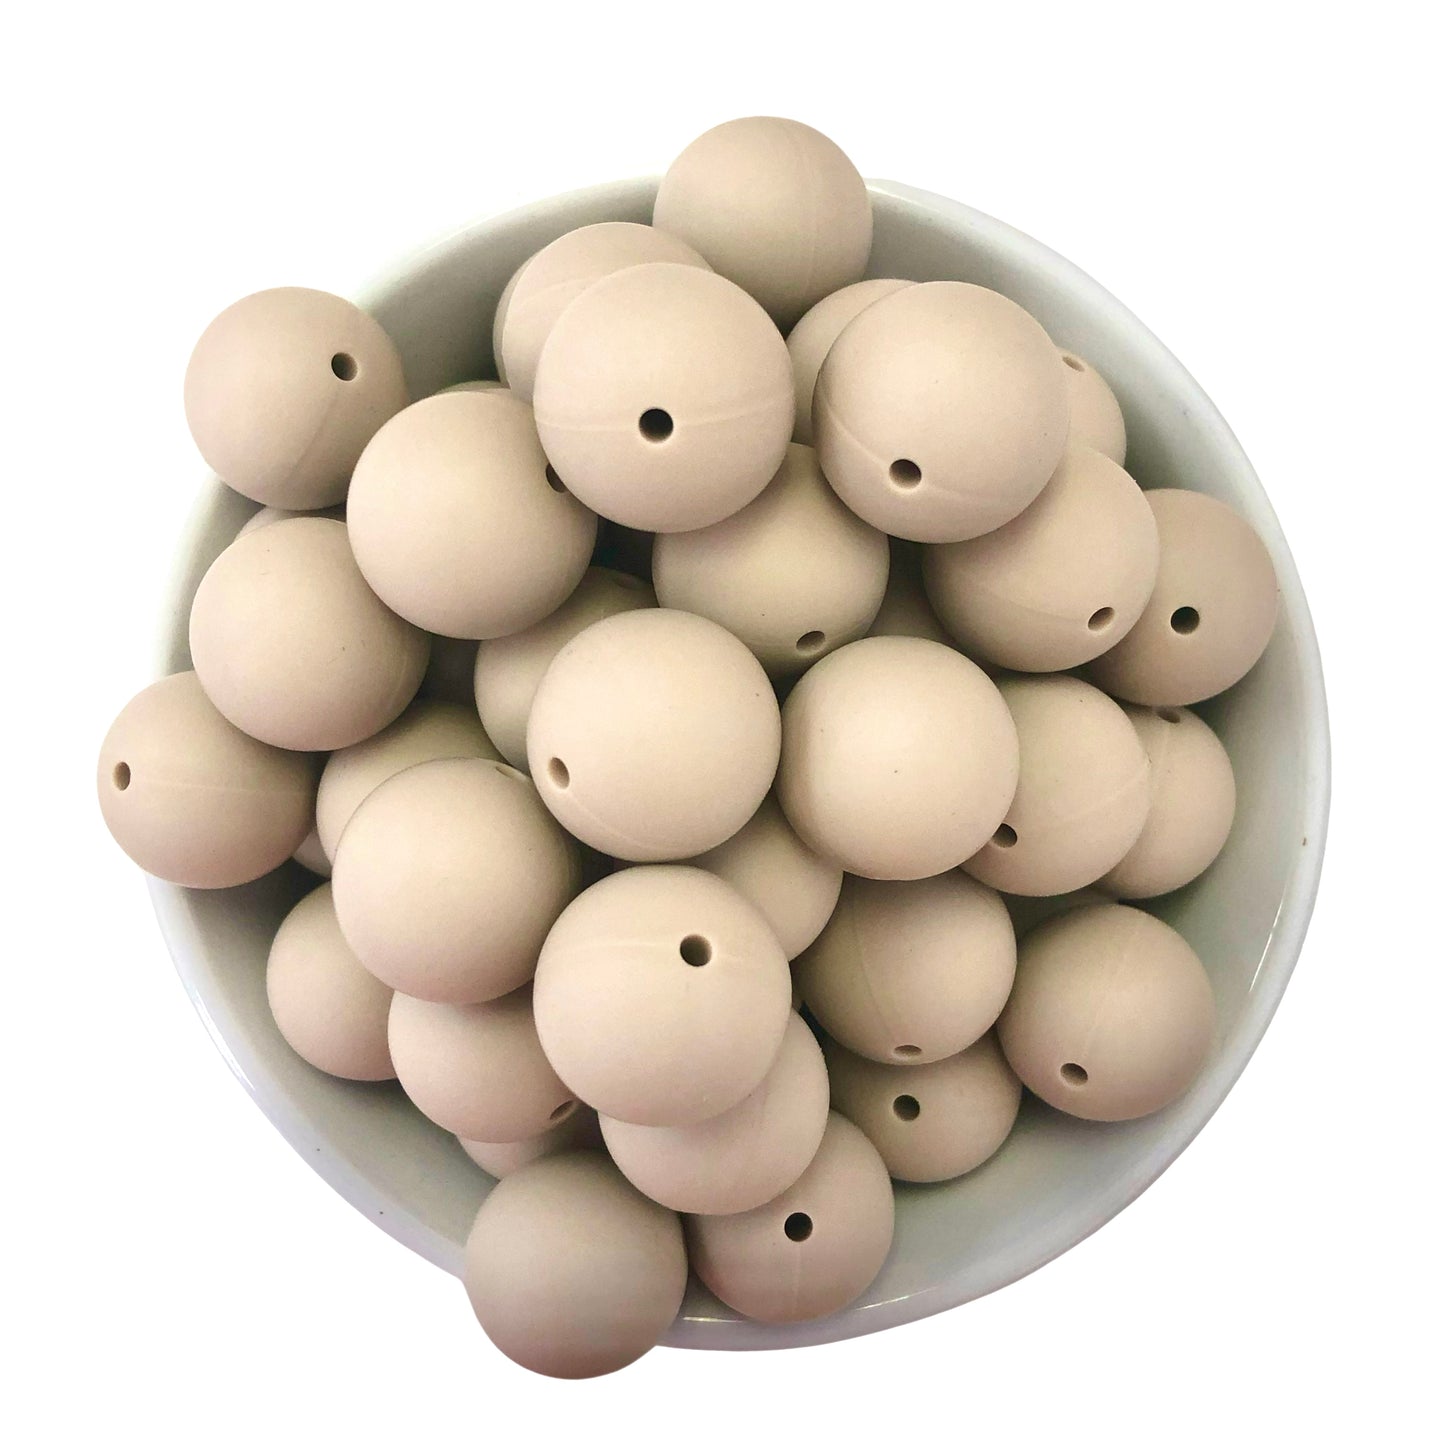 Sandy Dunes 19mm Silicone Beads - 5 pk.